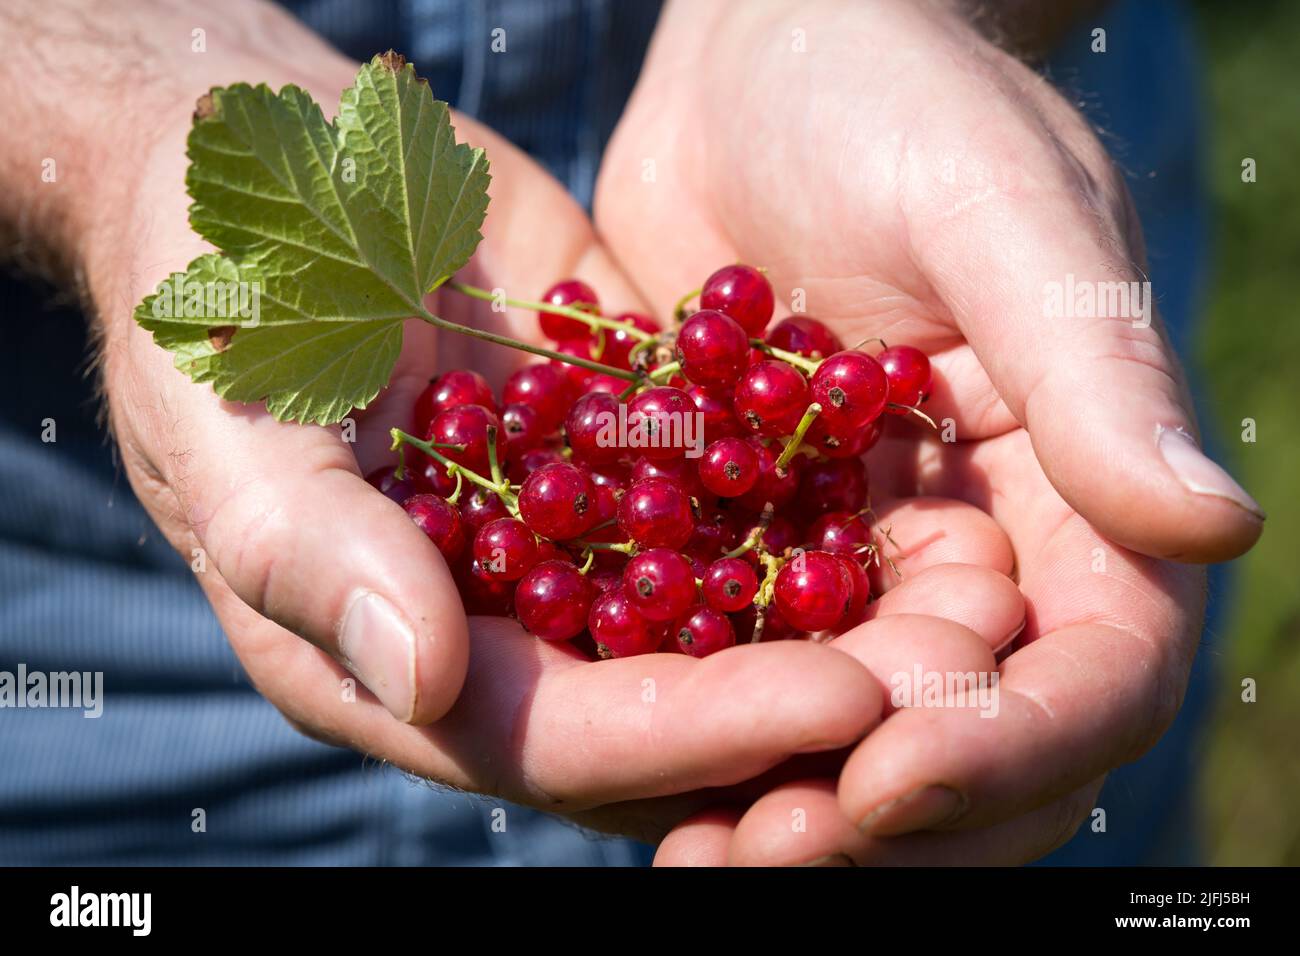 Man holding redcurrants in his hands Stock Photo